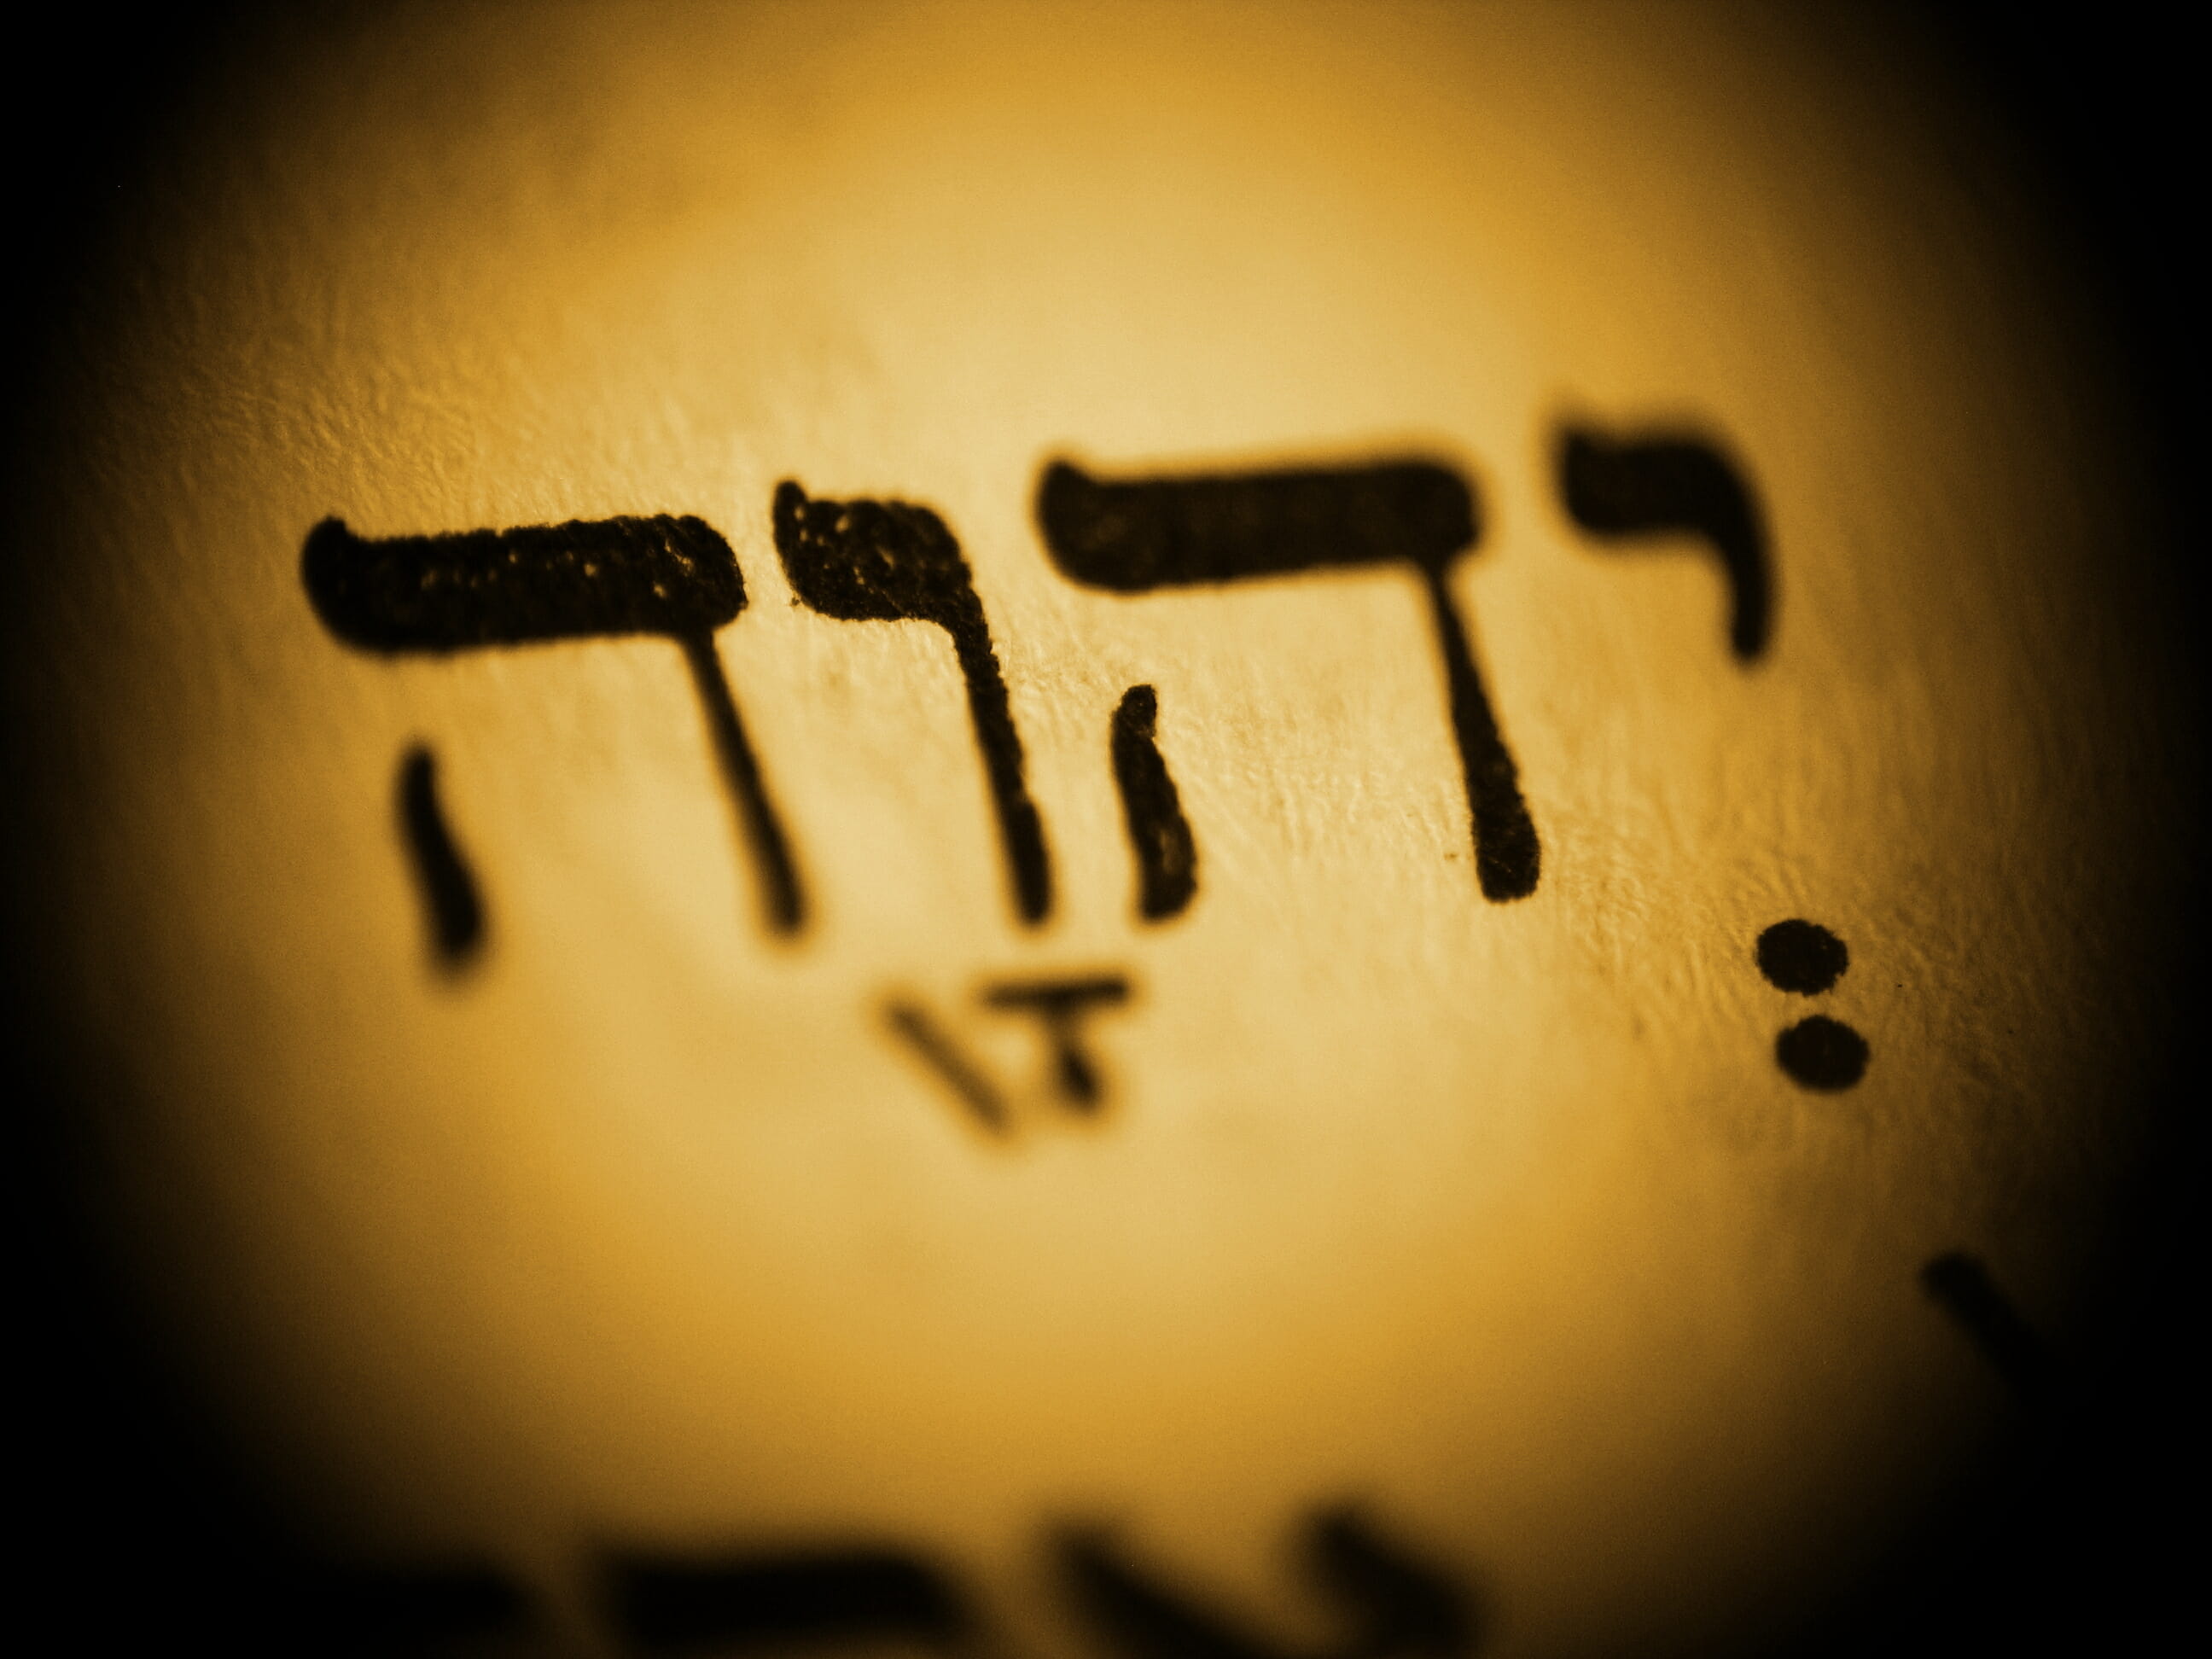 Is Yahweh “Divine Name” For God?